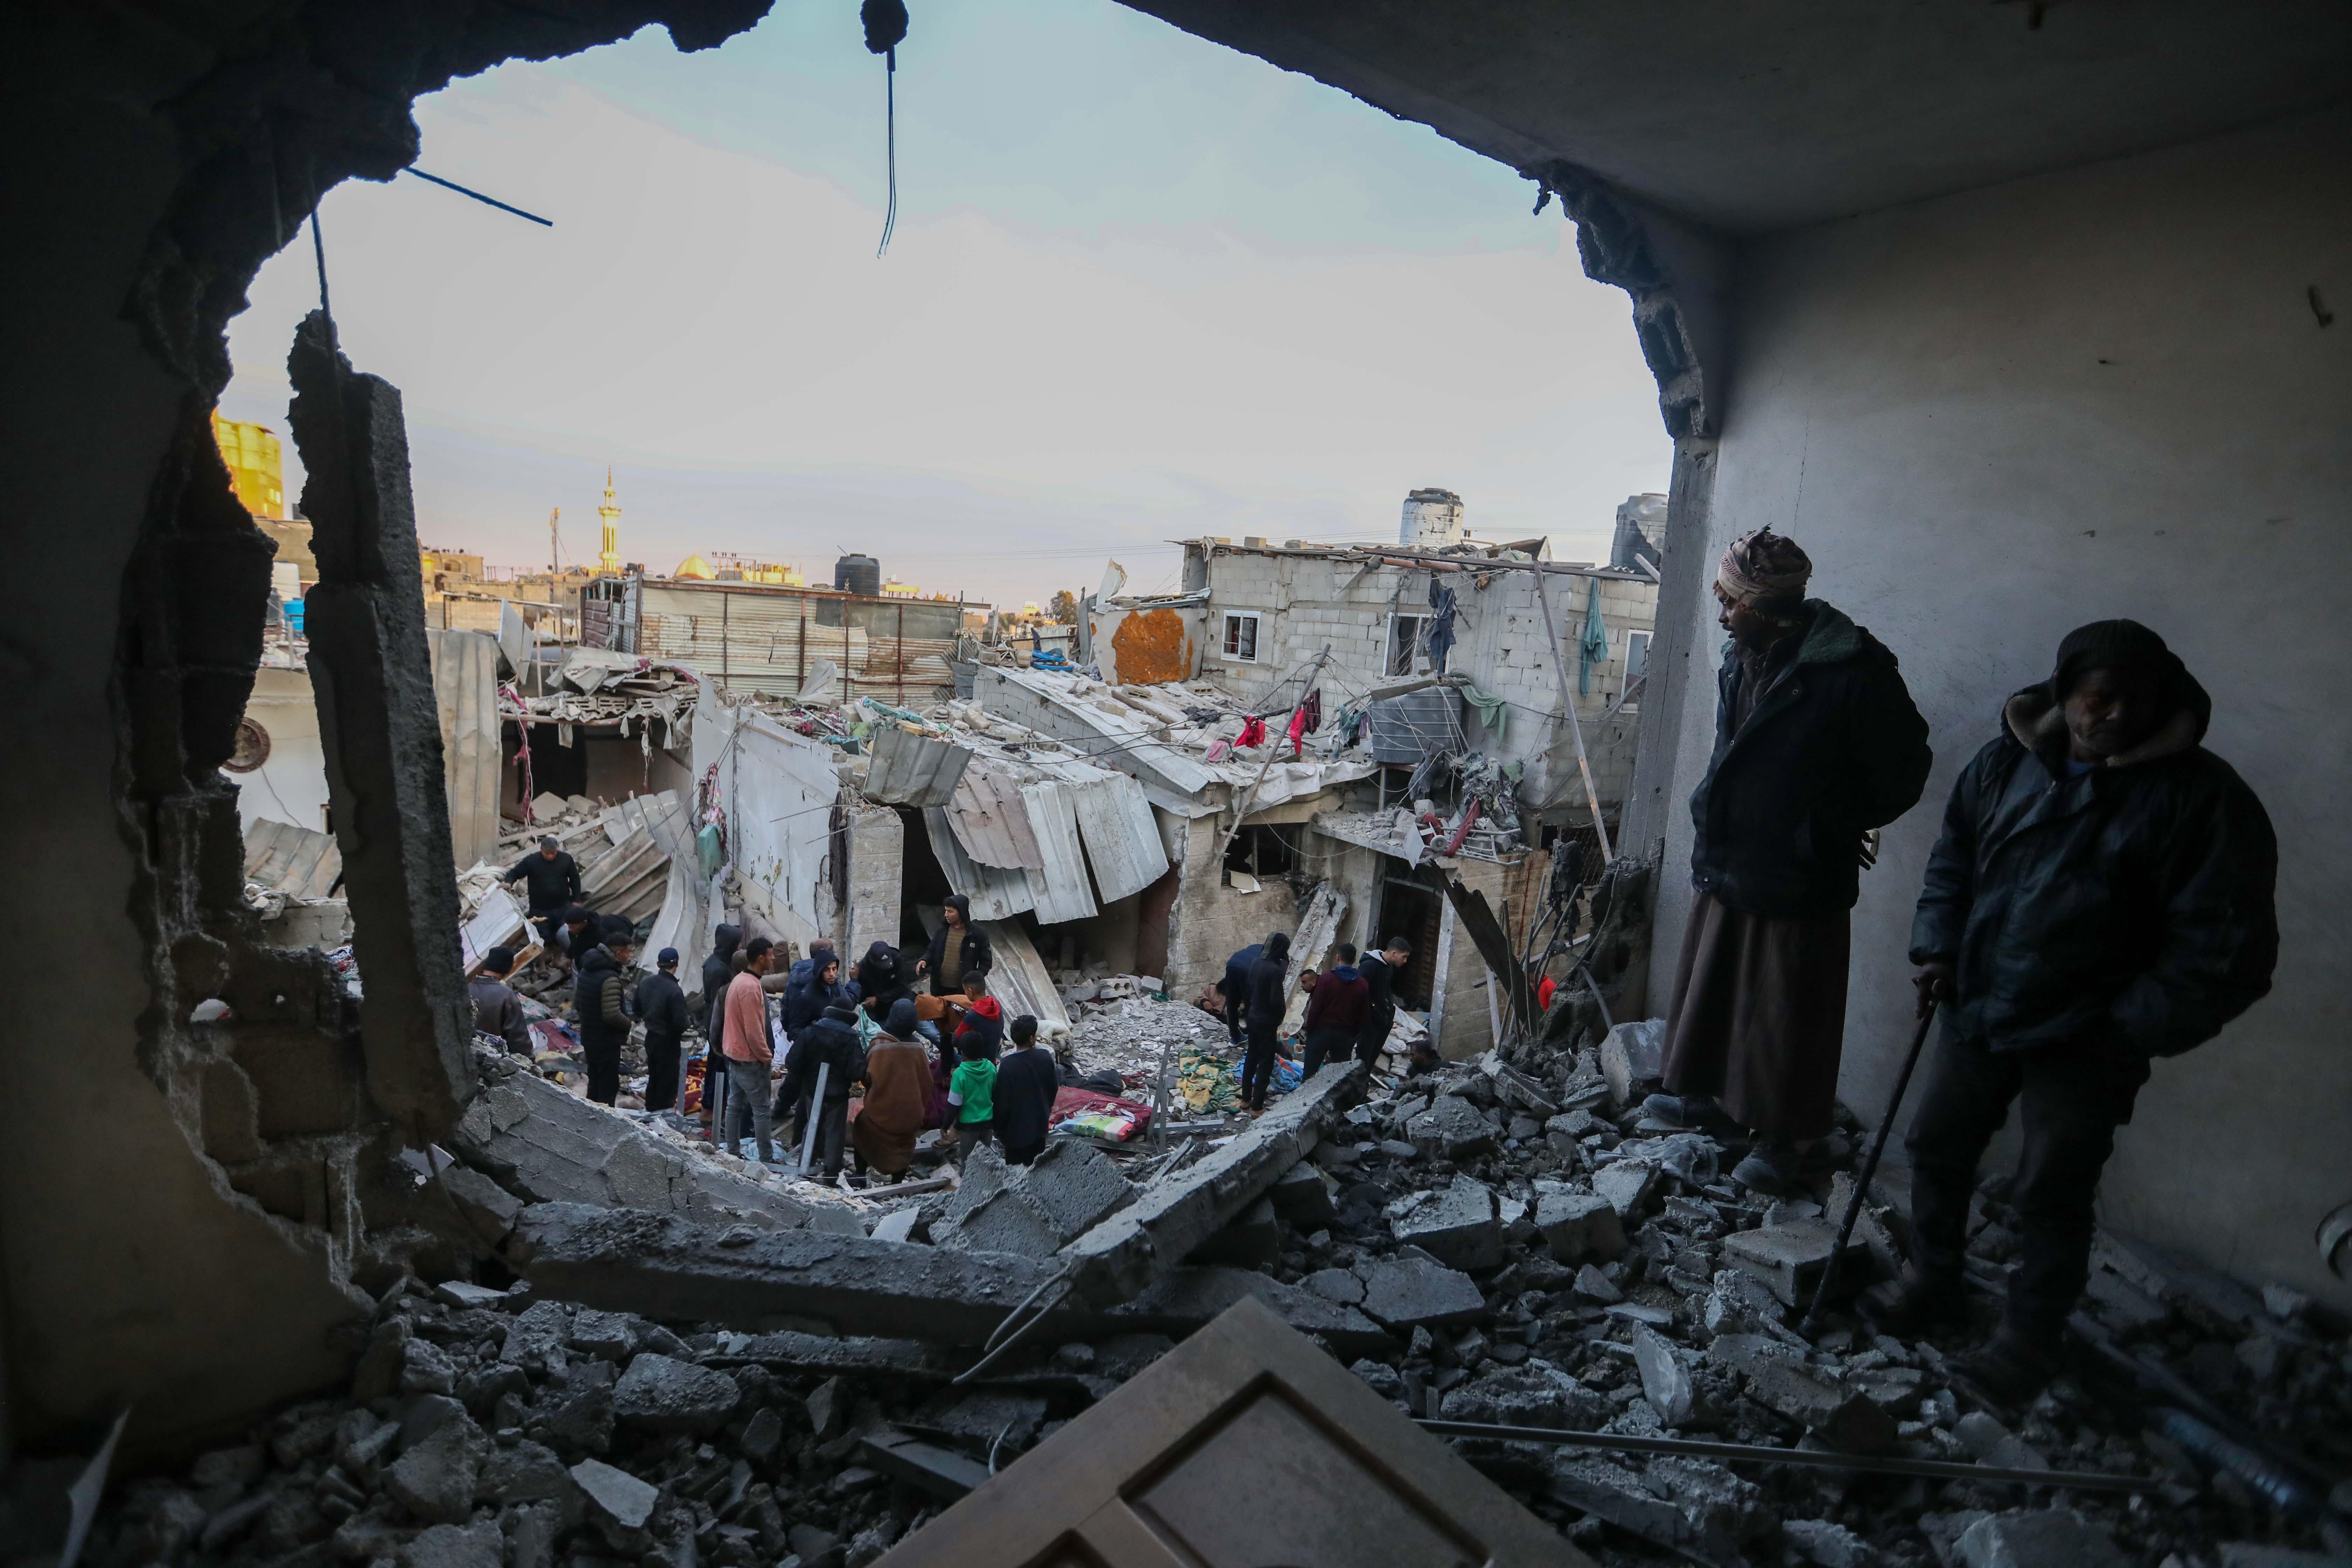 People stand in a building reduced to rubble with a large hole blown through the wall.